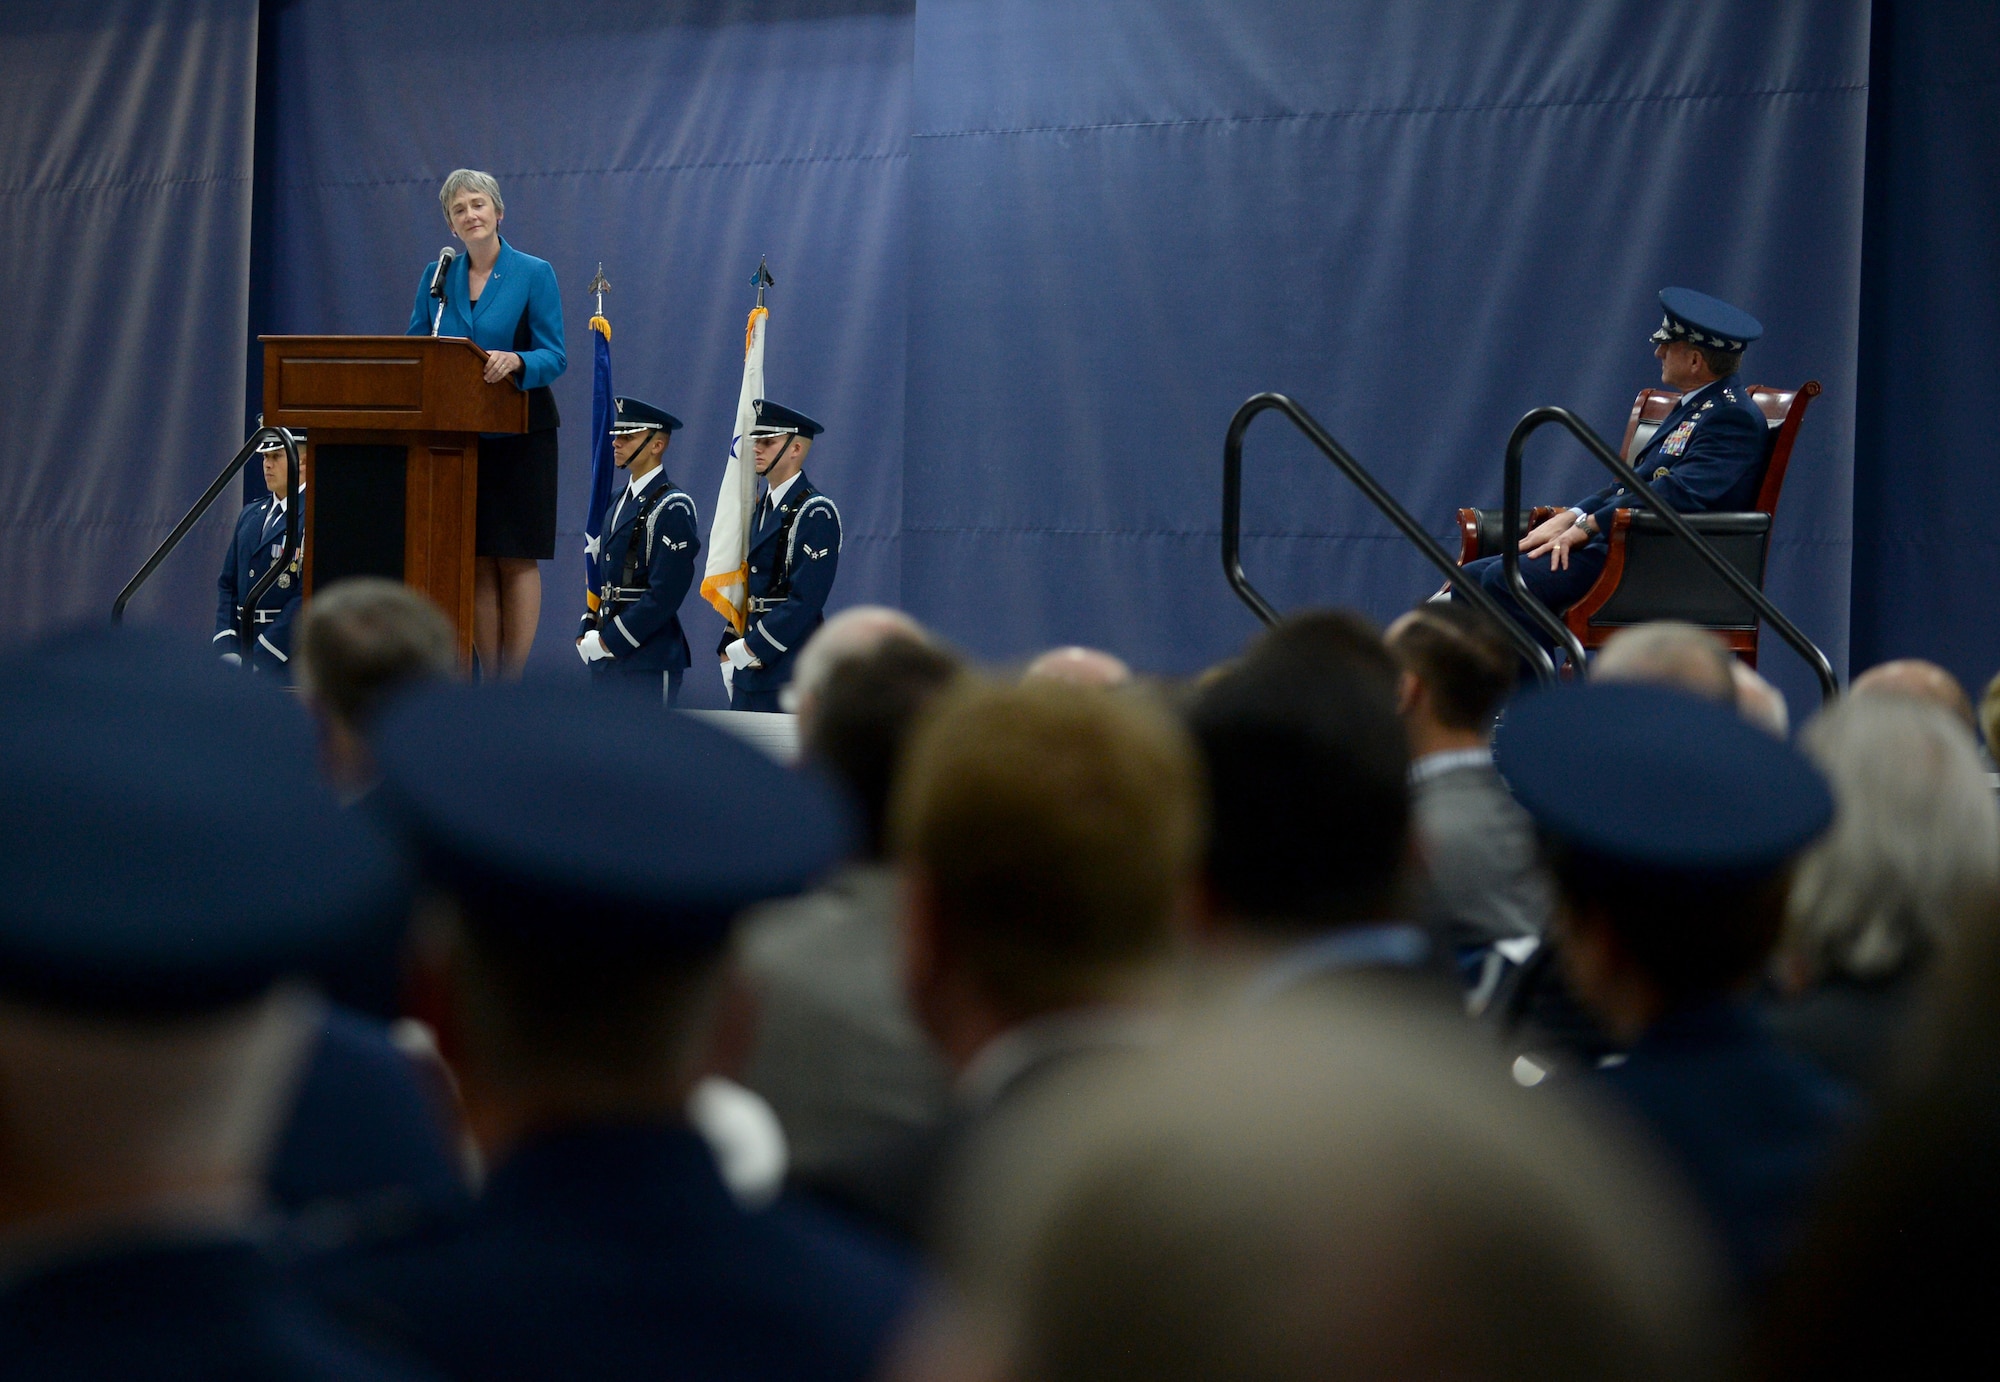 Secretary of the Air Force Heather Wilson speaks at the farewell ceremony in honor of Wilson at Joint Base Andrews, Md., May 21, 2019. (U.S. Air Force photo by Staff Sgt. Chad Trujillo)